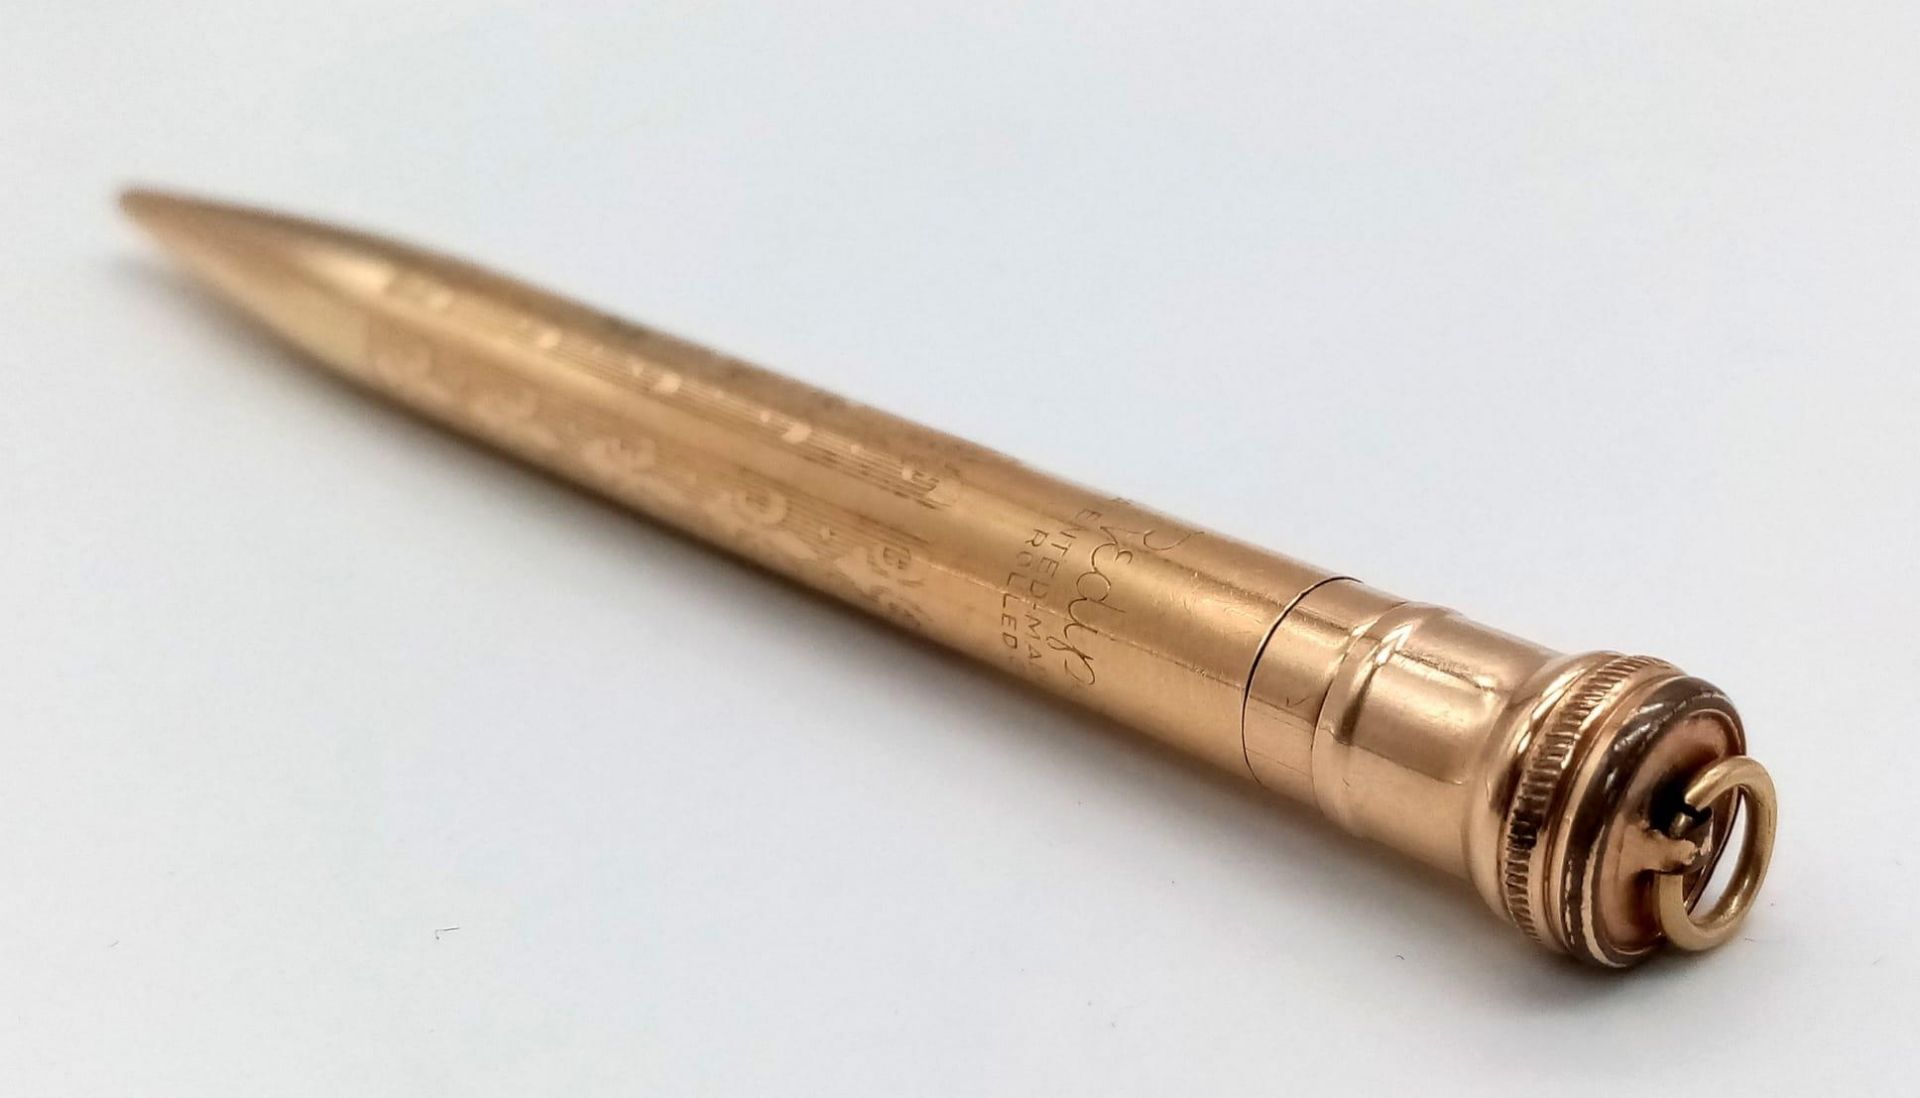 A vintage Redipoint Rolled gold pen. Beautiful engraved design, measures 11cm and weighs 15.10 grams - Image 4 of 5